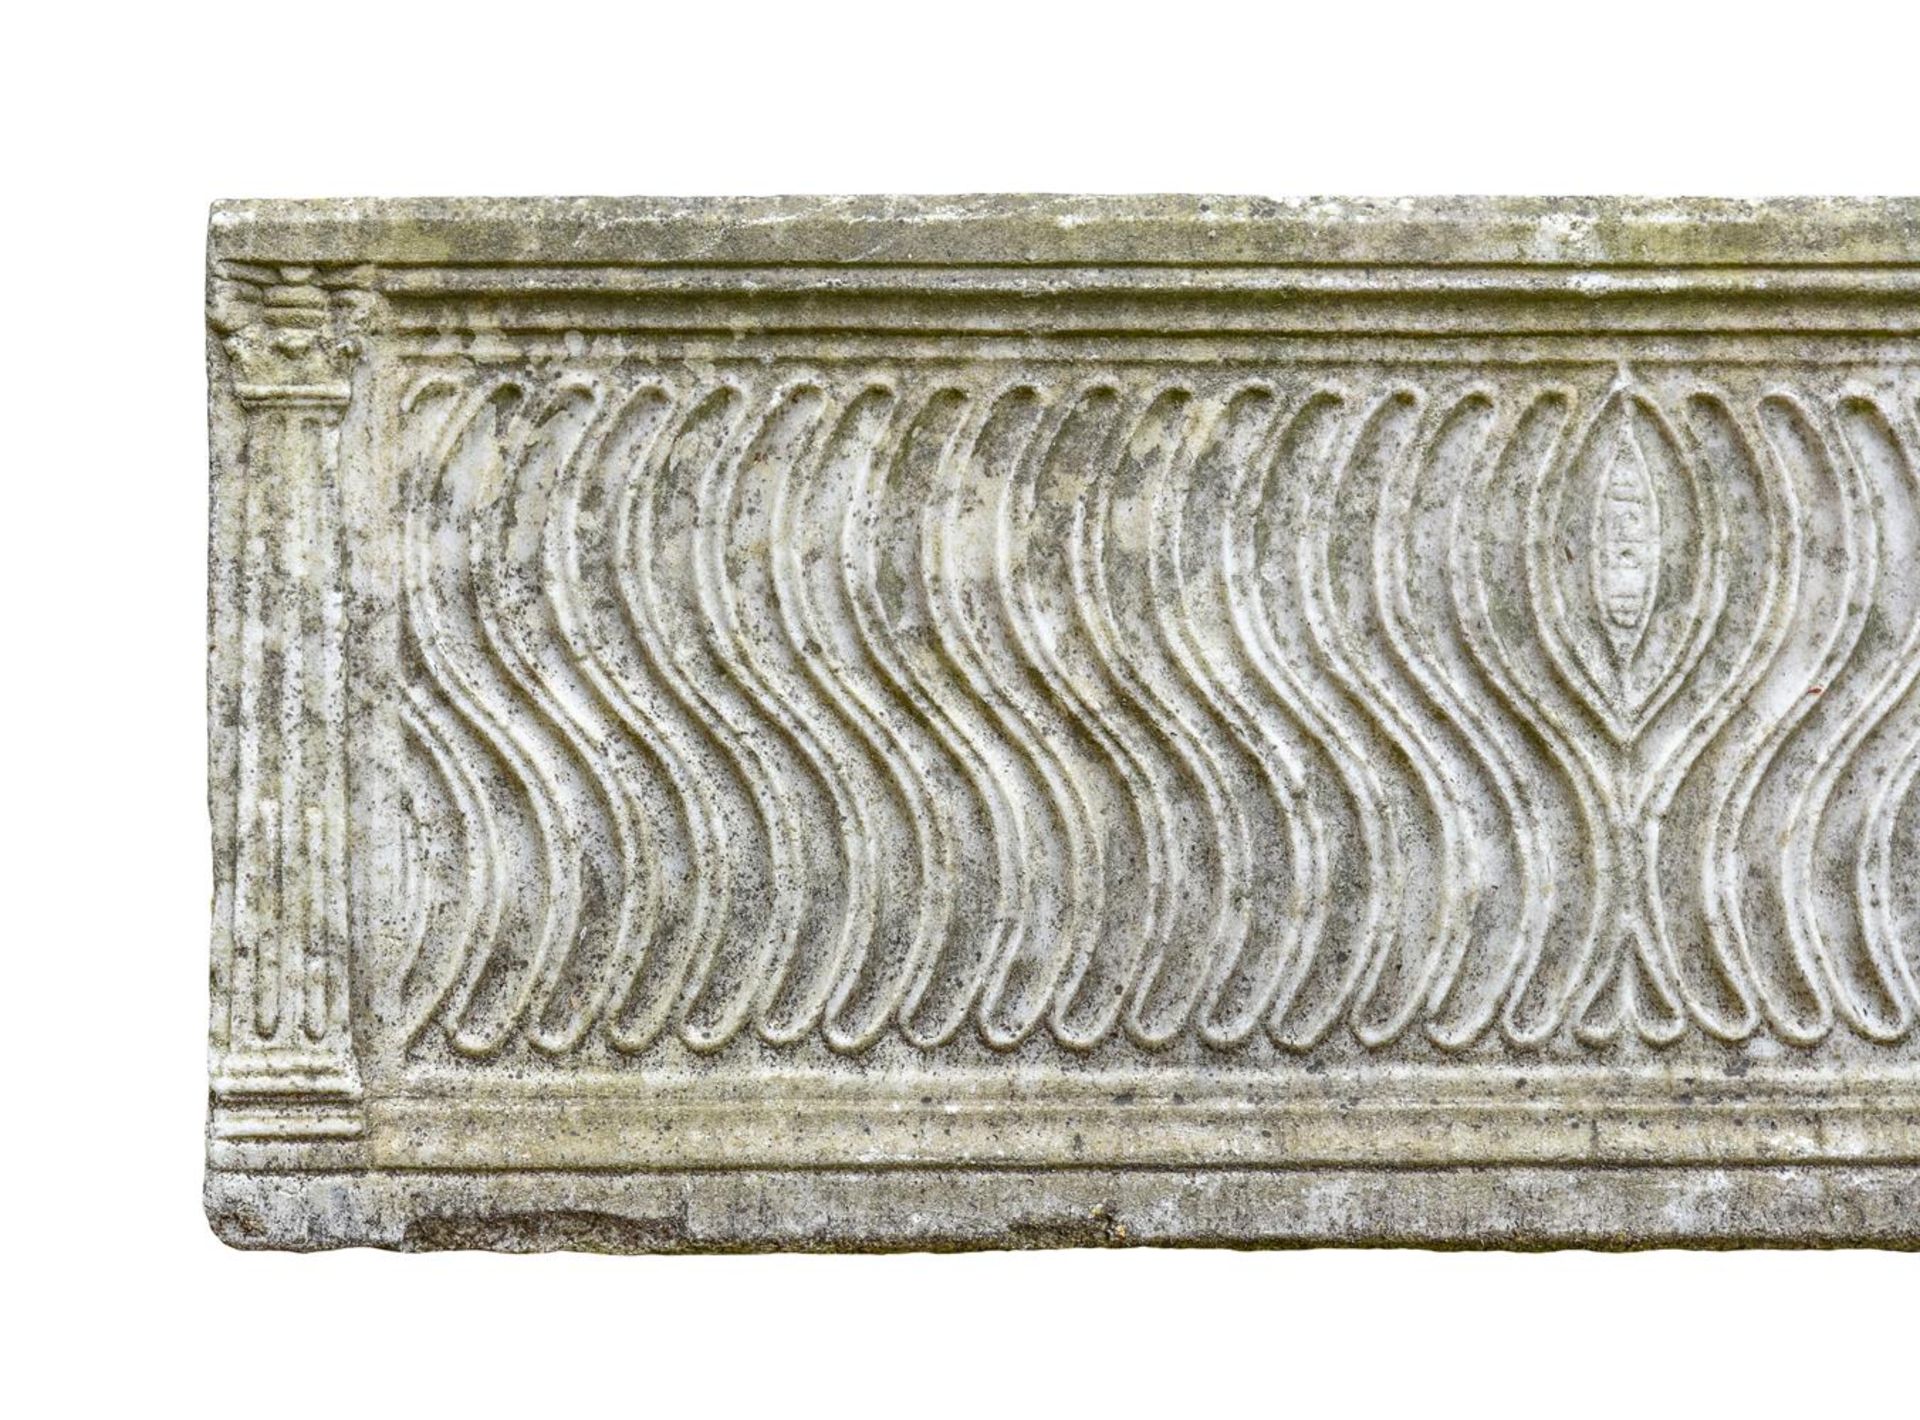 A ROMAN MARBLE STRIGILATED SARCOPHAGUS, CIRCA LATE 2ND-3RD CENTURY A.D. - Image 3 of 3